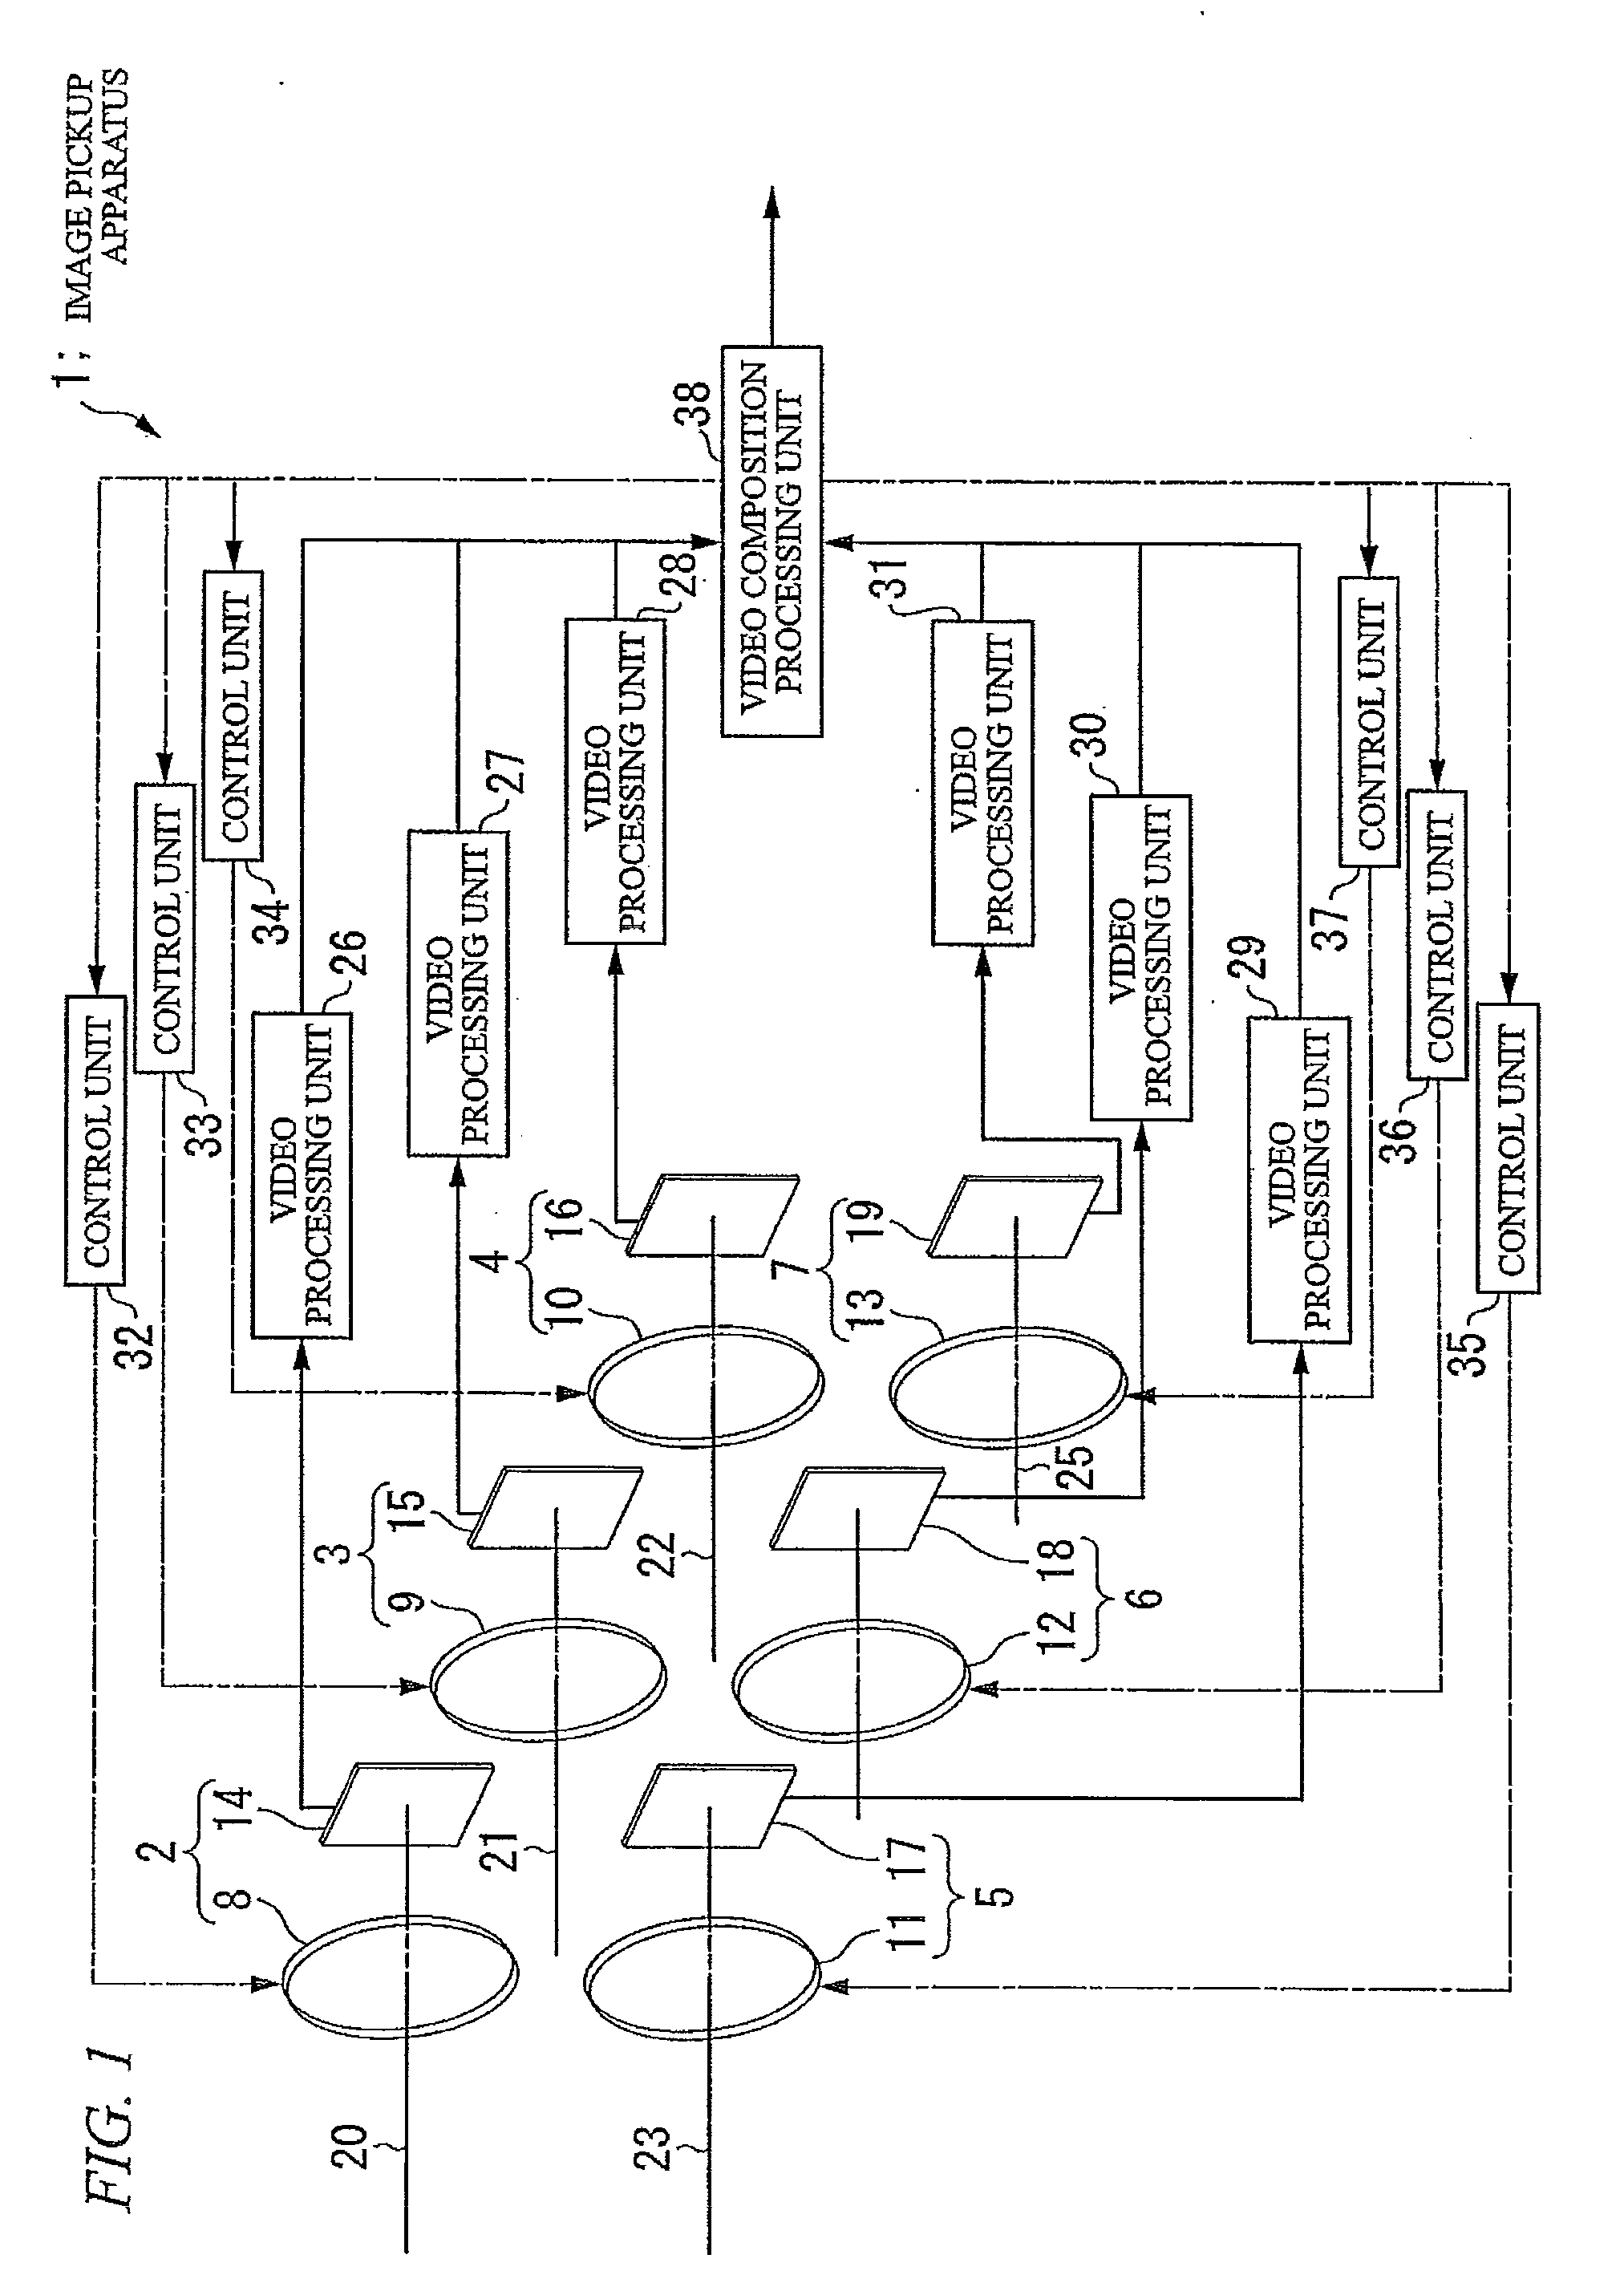 Image pickup apparatus and optical-axis control method